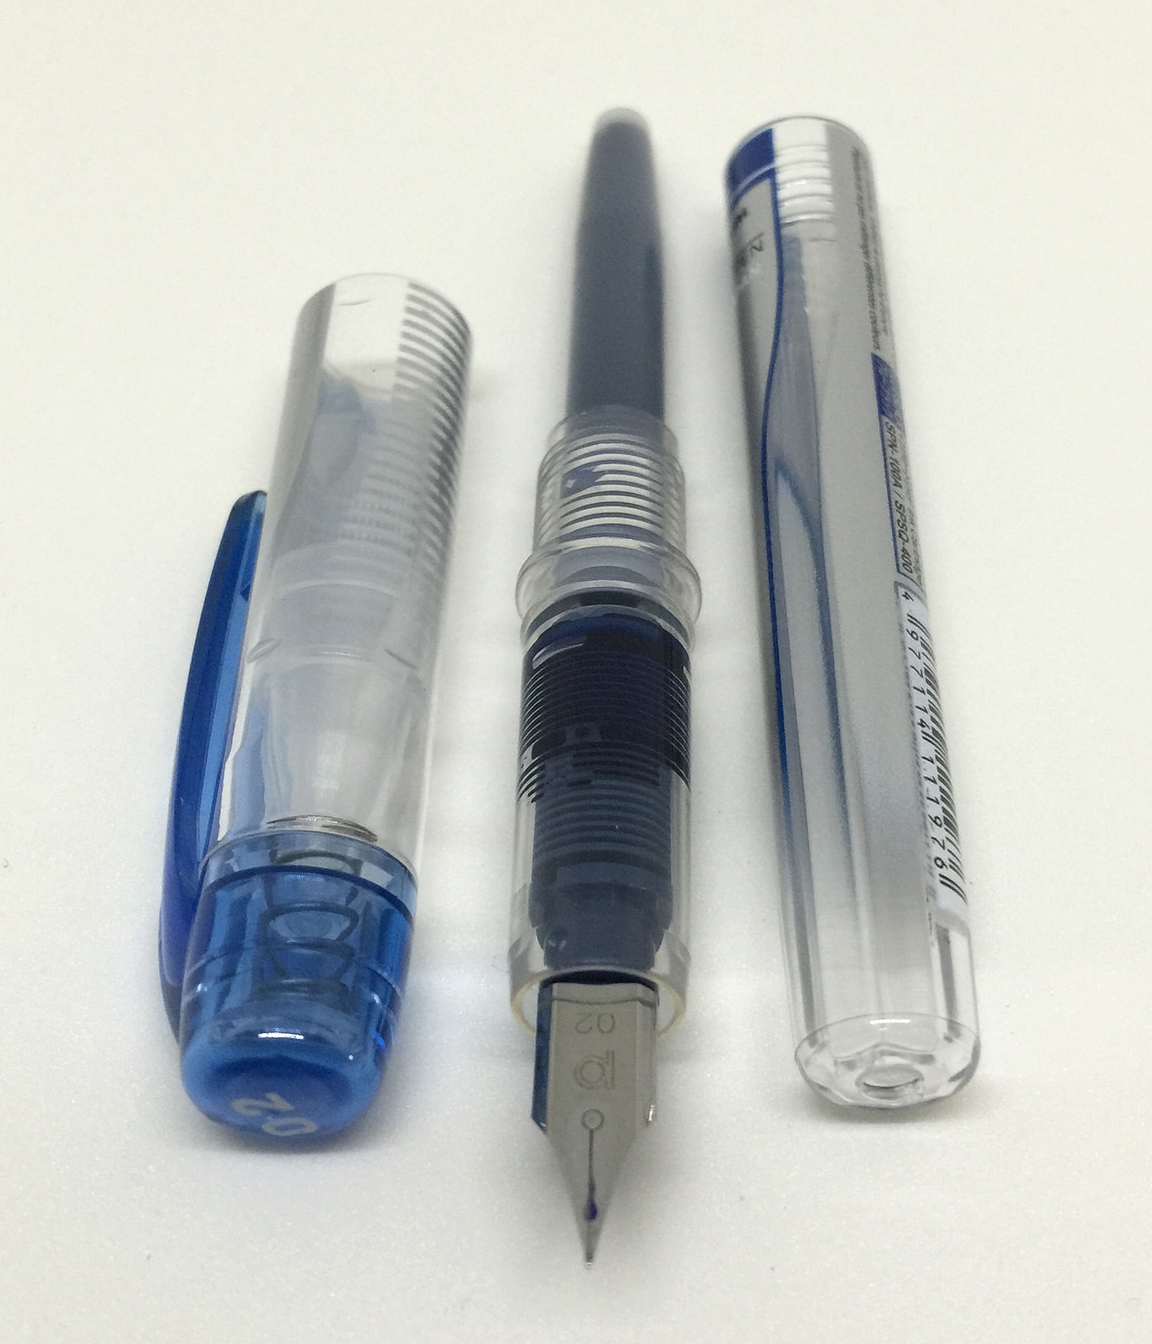 The Proof is in the Water — The Pen Addict